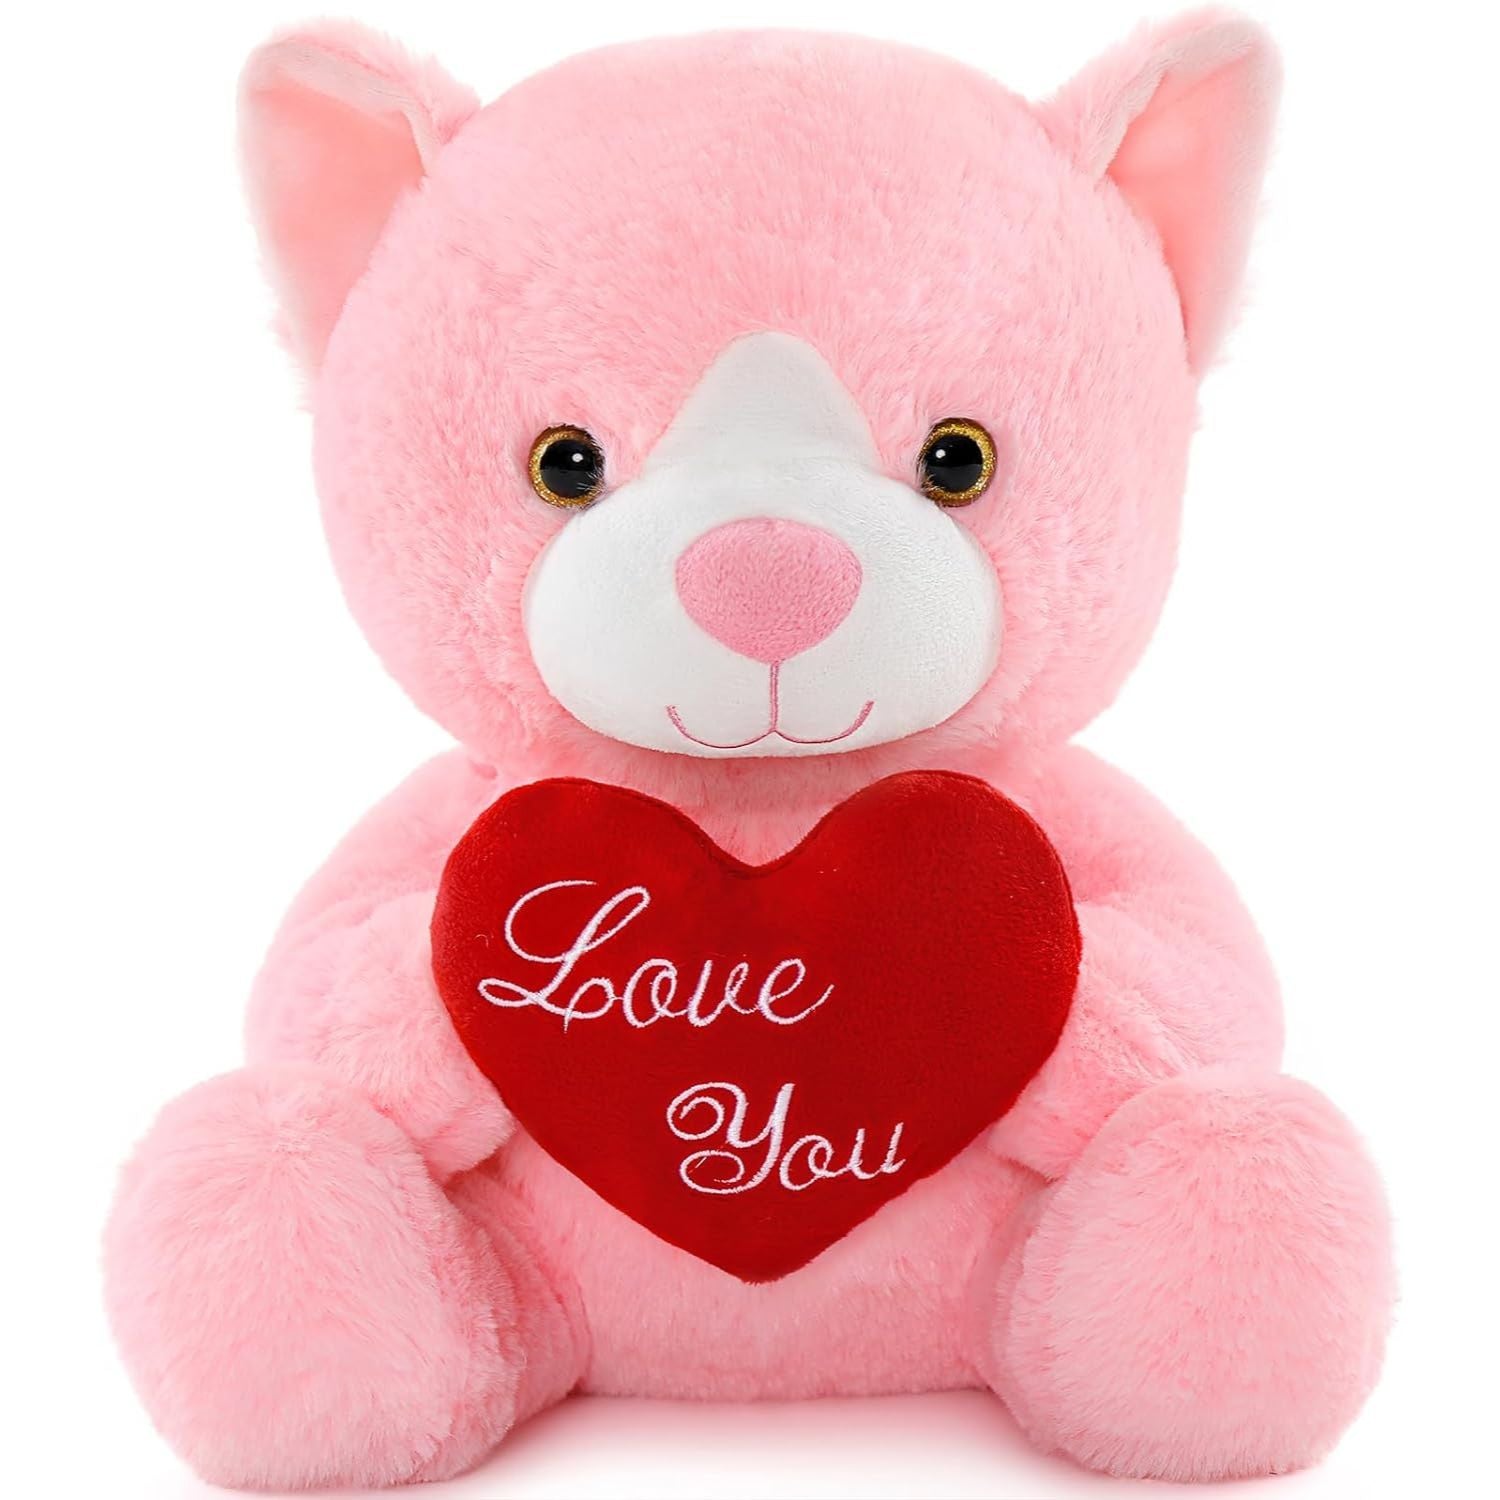 Cat Plush Toy, Pink, 12 Inches